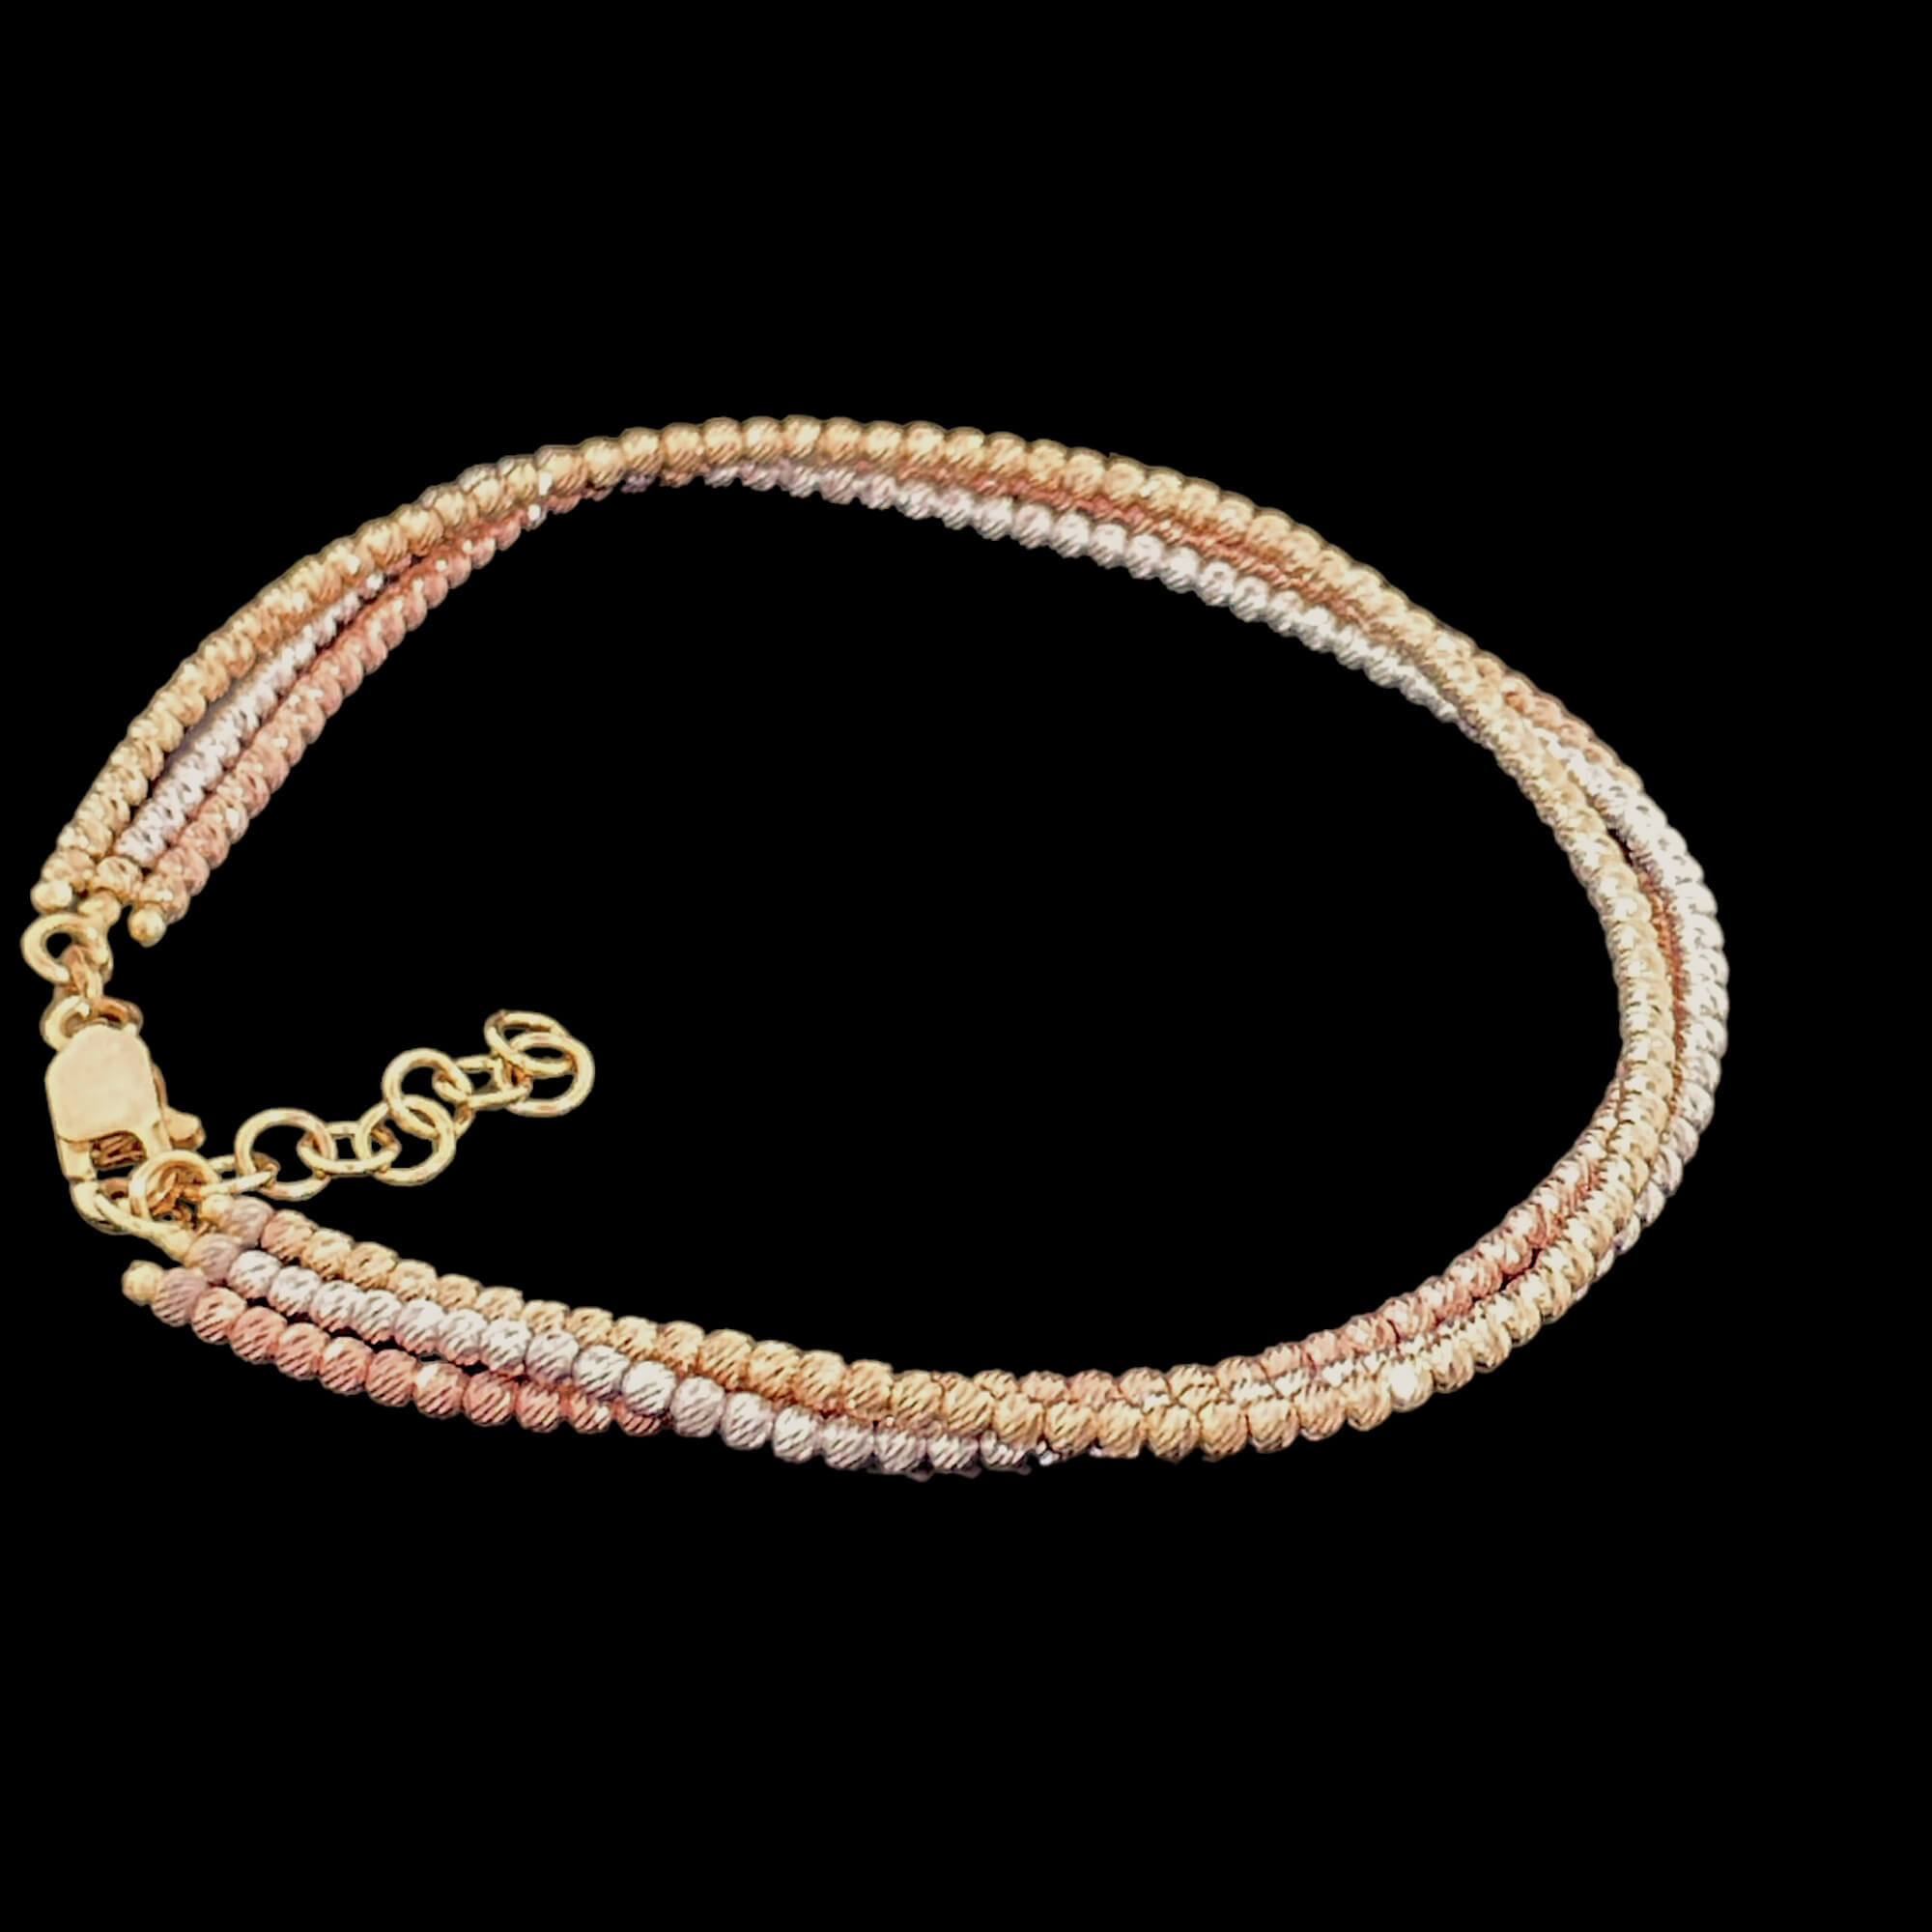 2mm bracelet of three rows of silver, rose and gilded